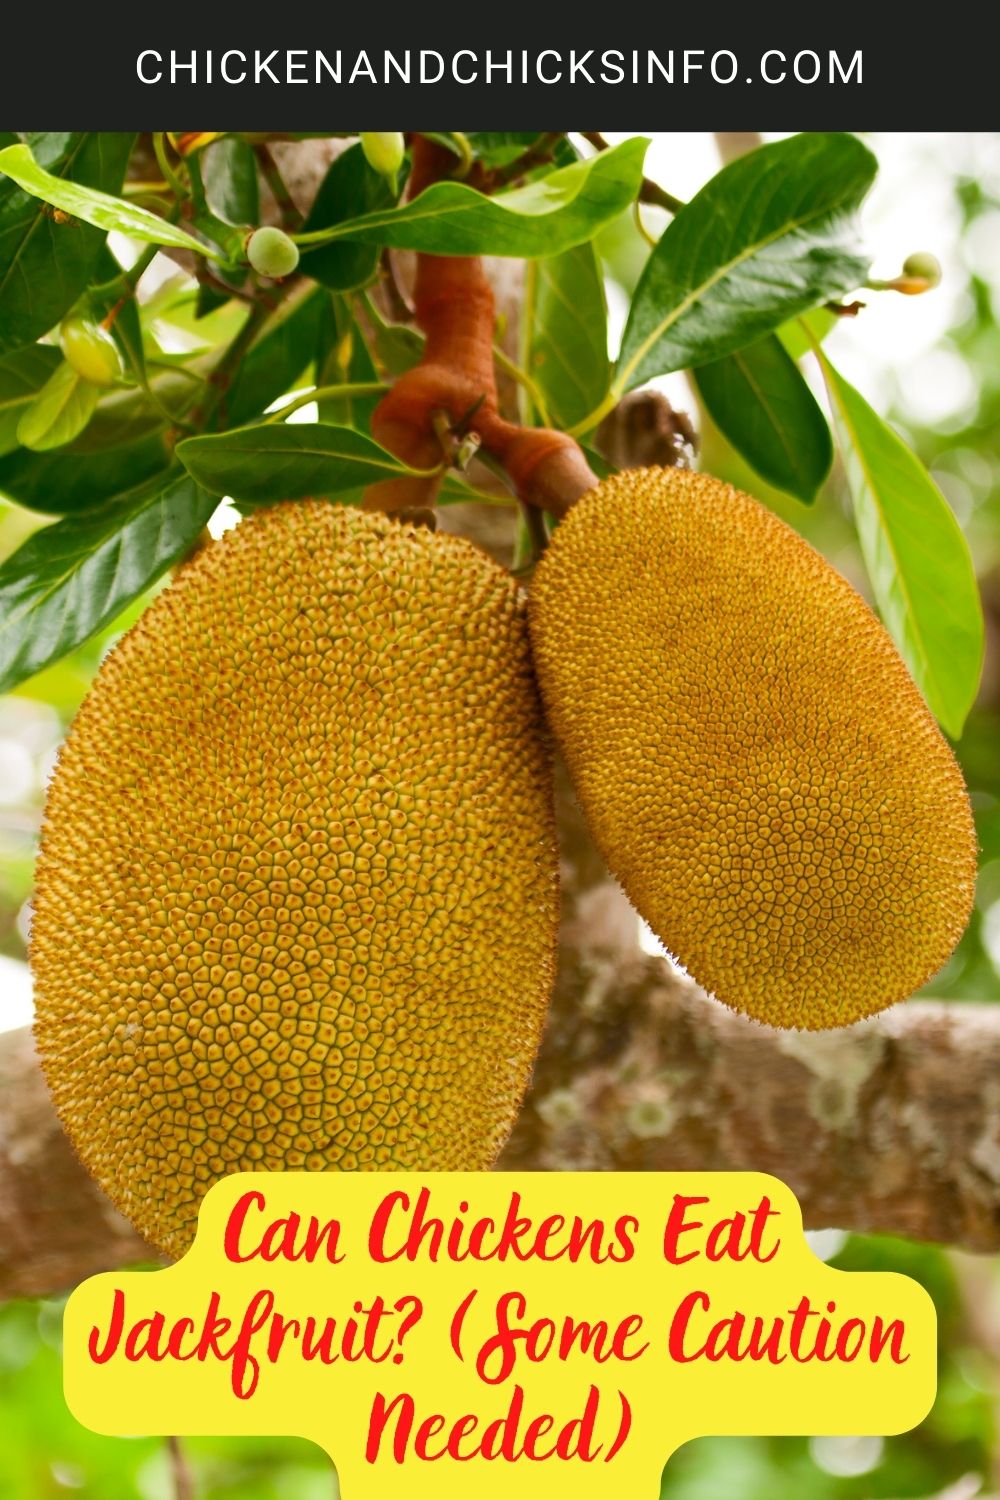 Can Chickens Eat Jackfruit? (Some Caution Needed) poster.
